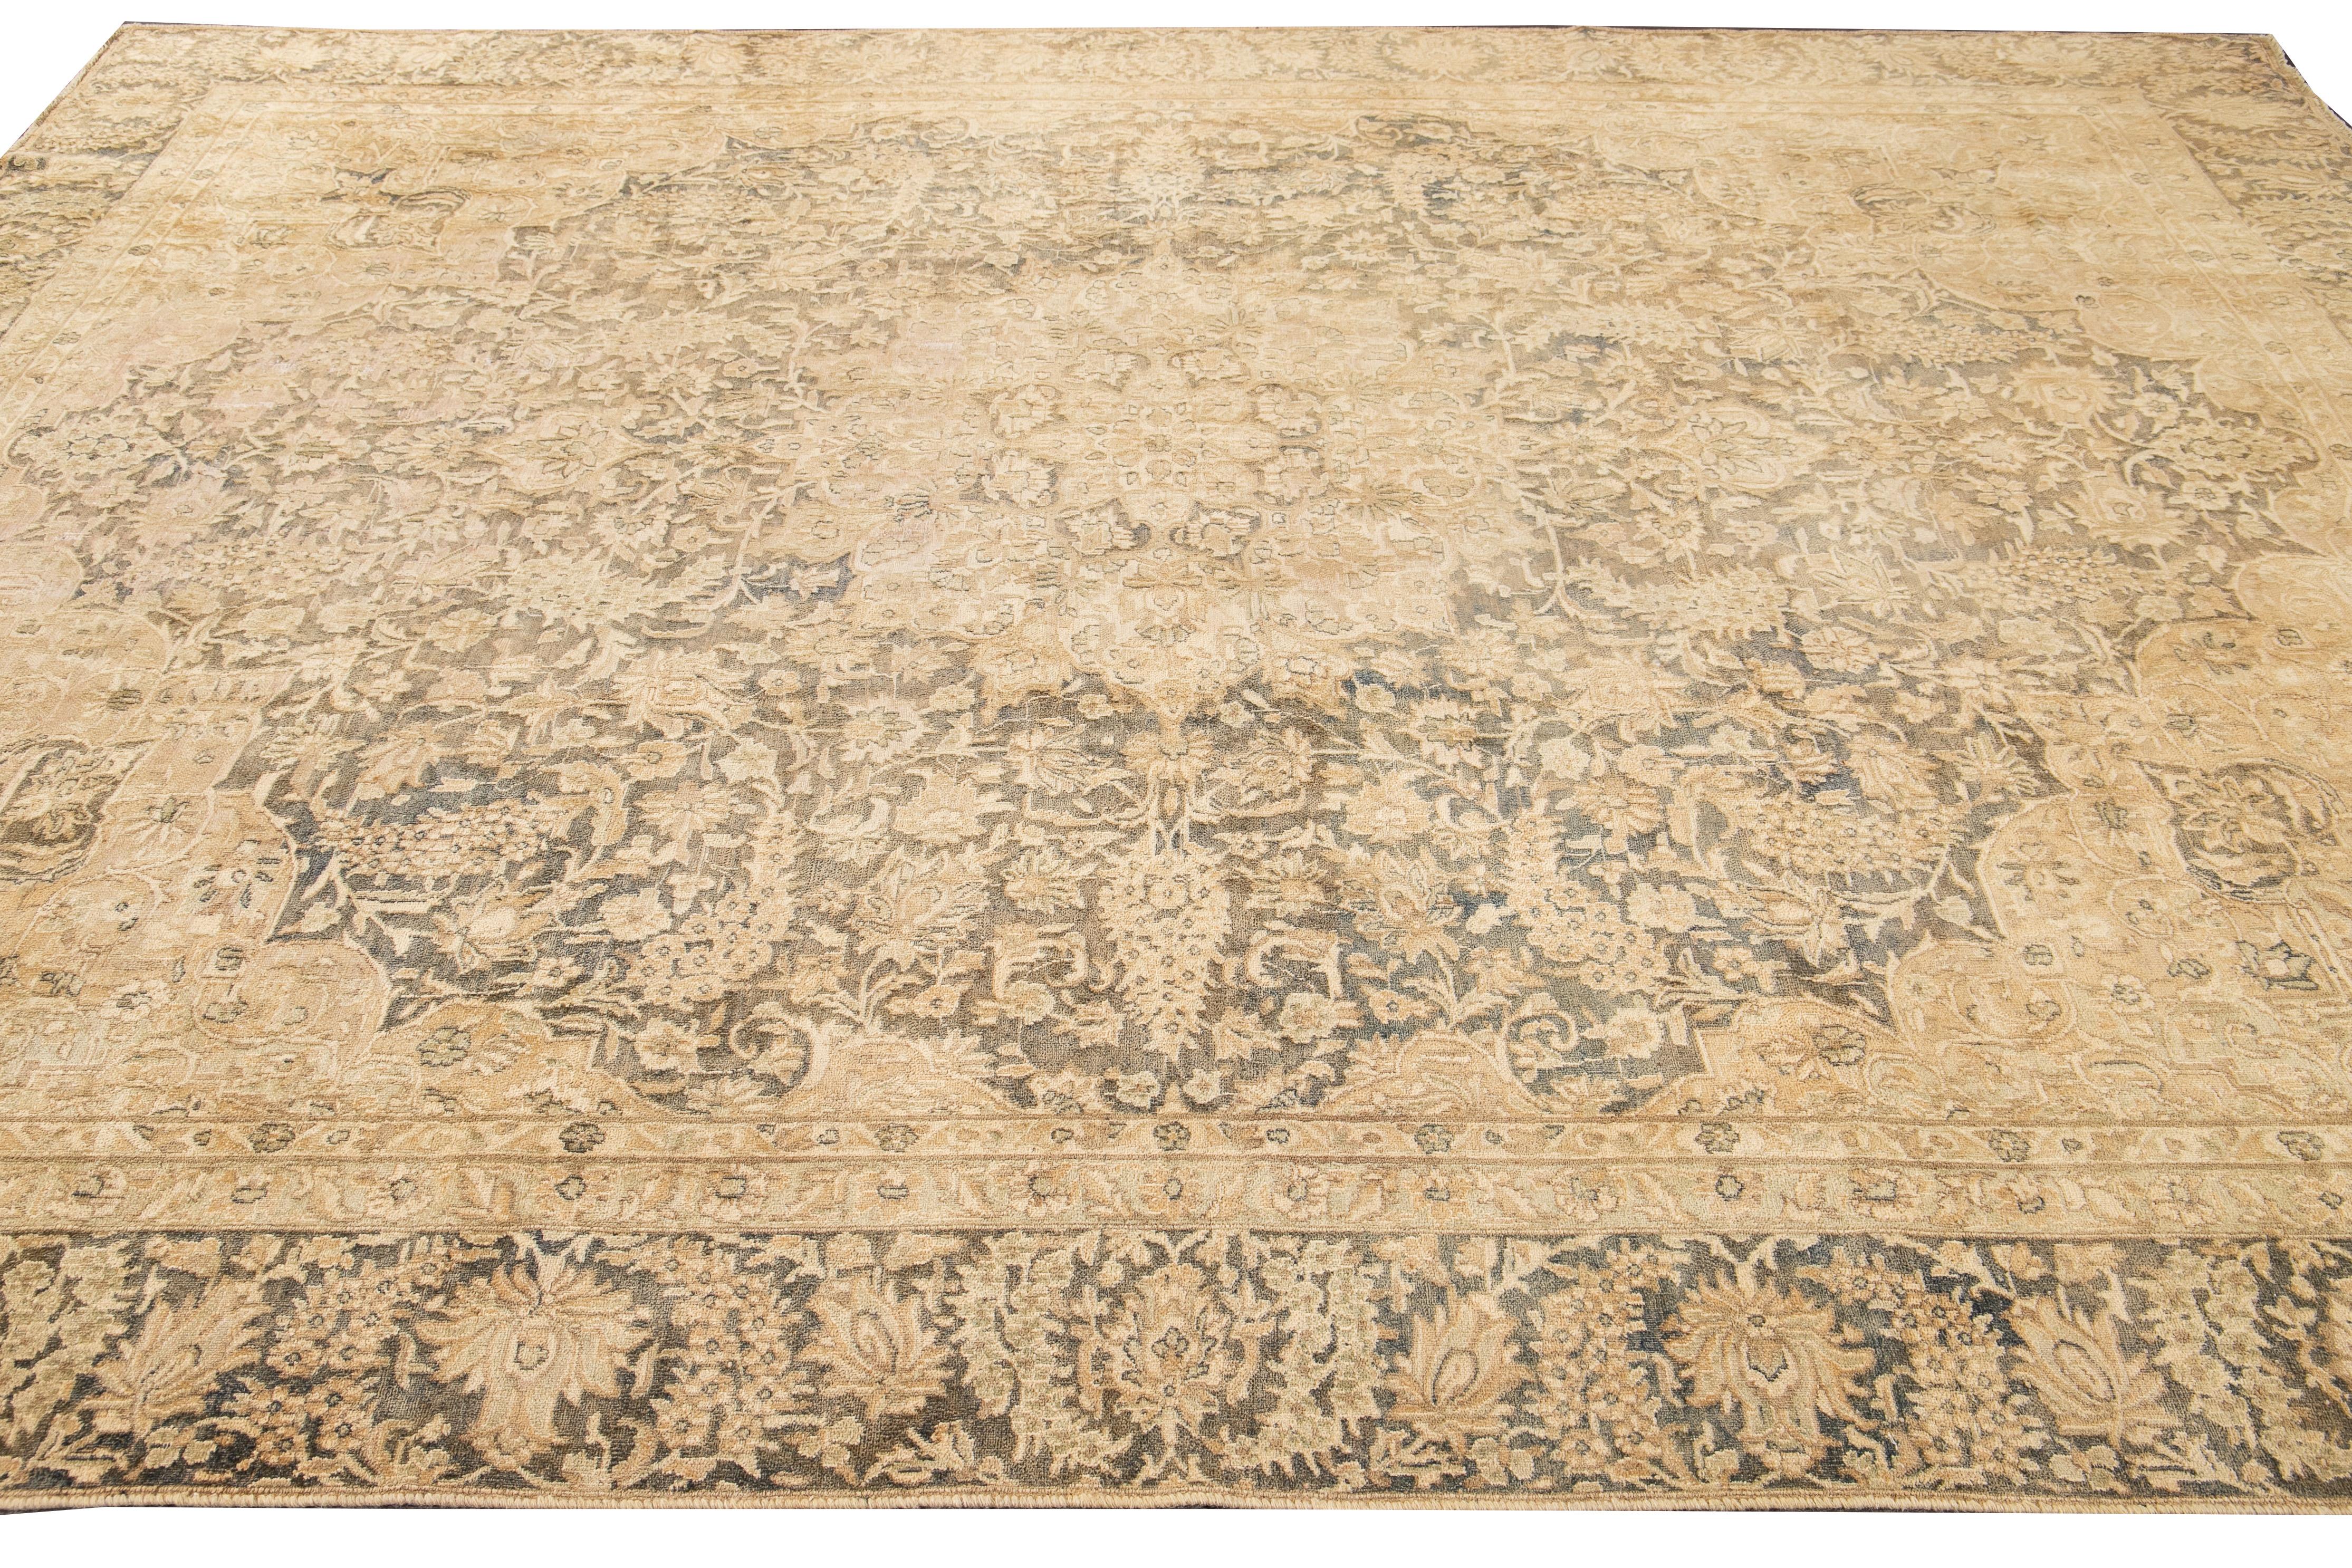 Beautiful antique Tabriz rug with a yellow field and gray accents with a medallion design in the center. 

This rug measures 9' 1